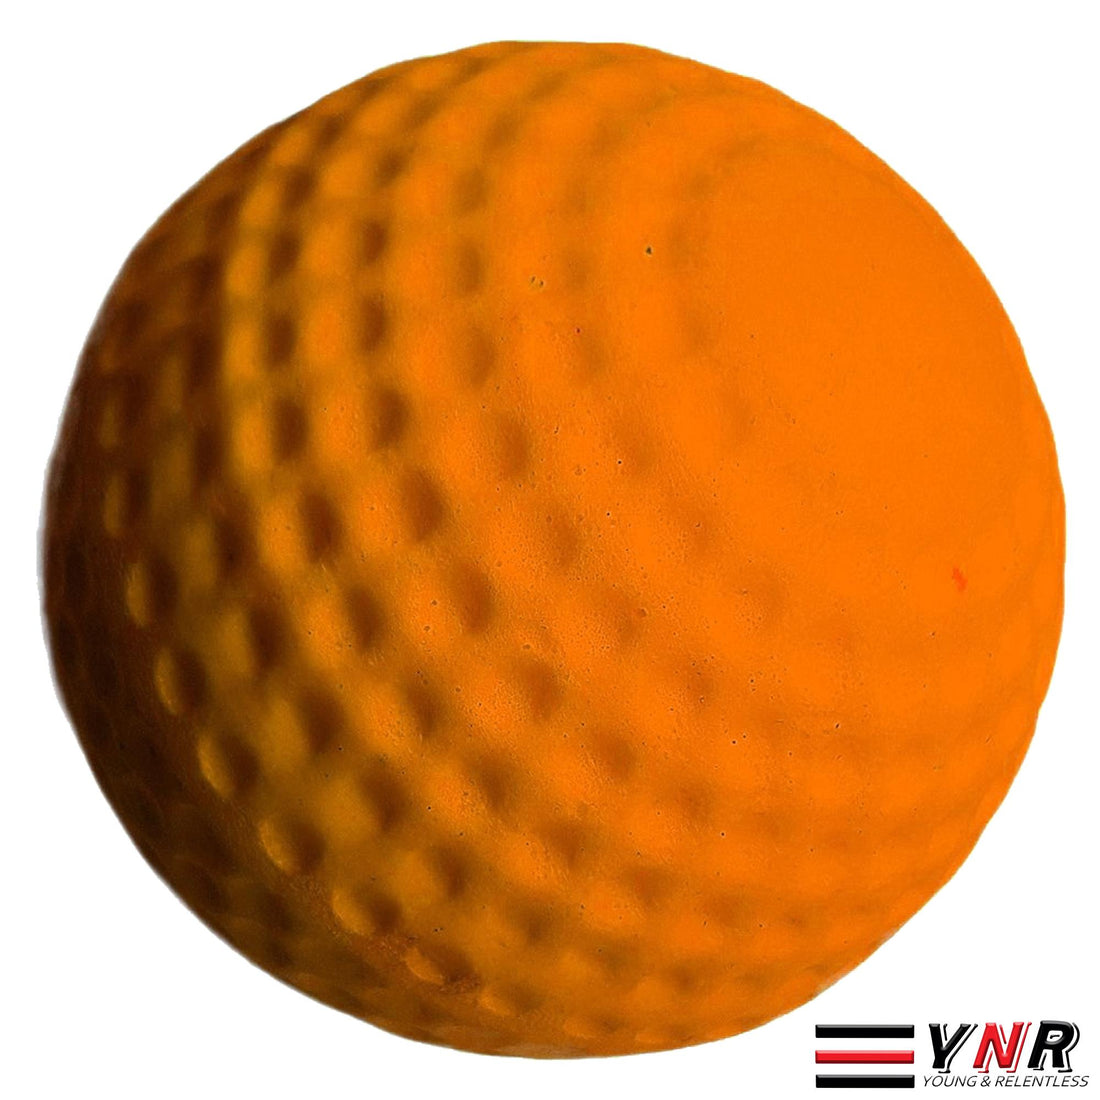 YNR Dimple Hockey Balls Outdoor Sports Practice Training Balls